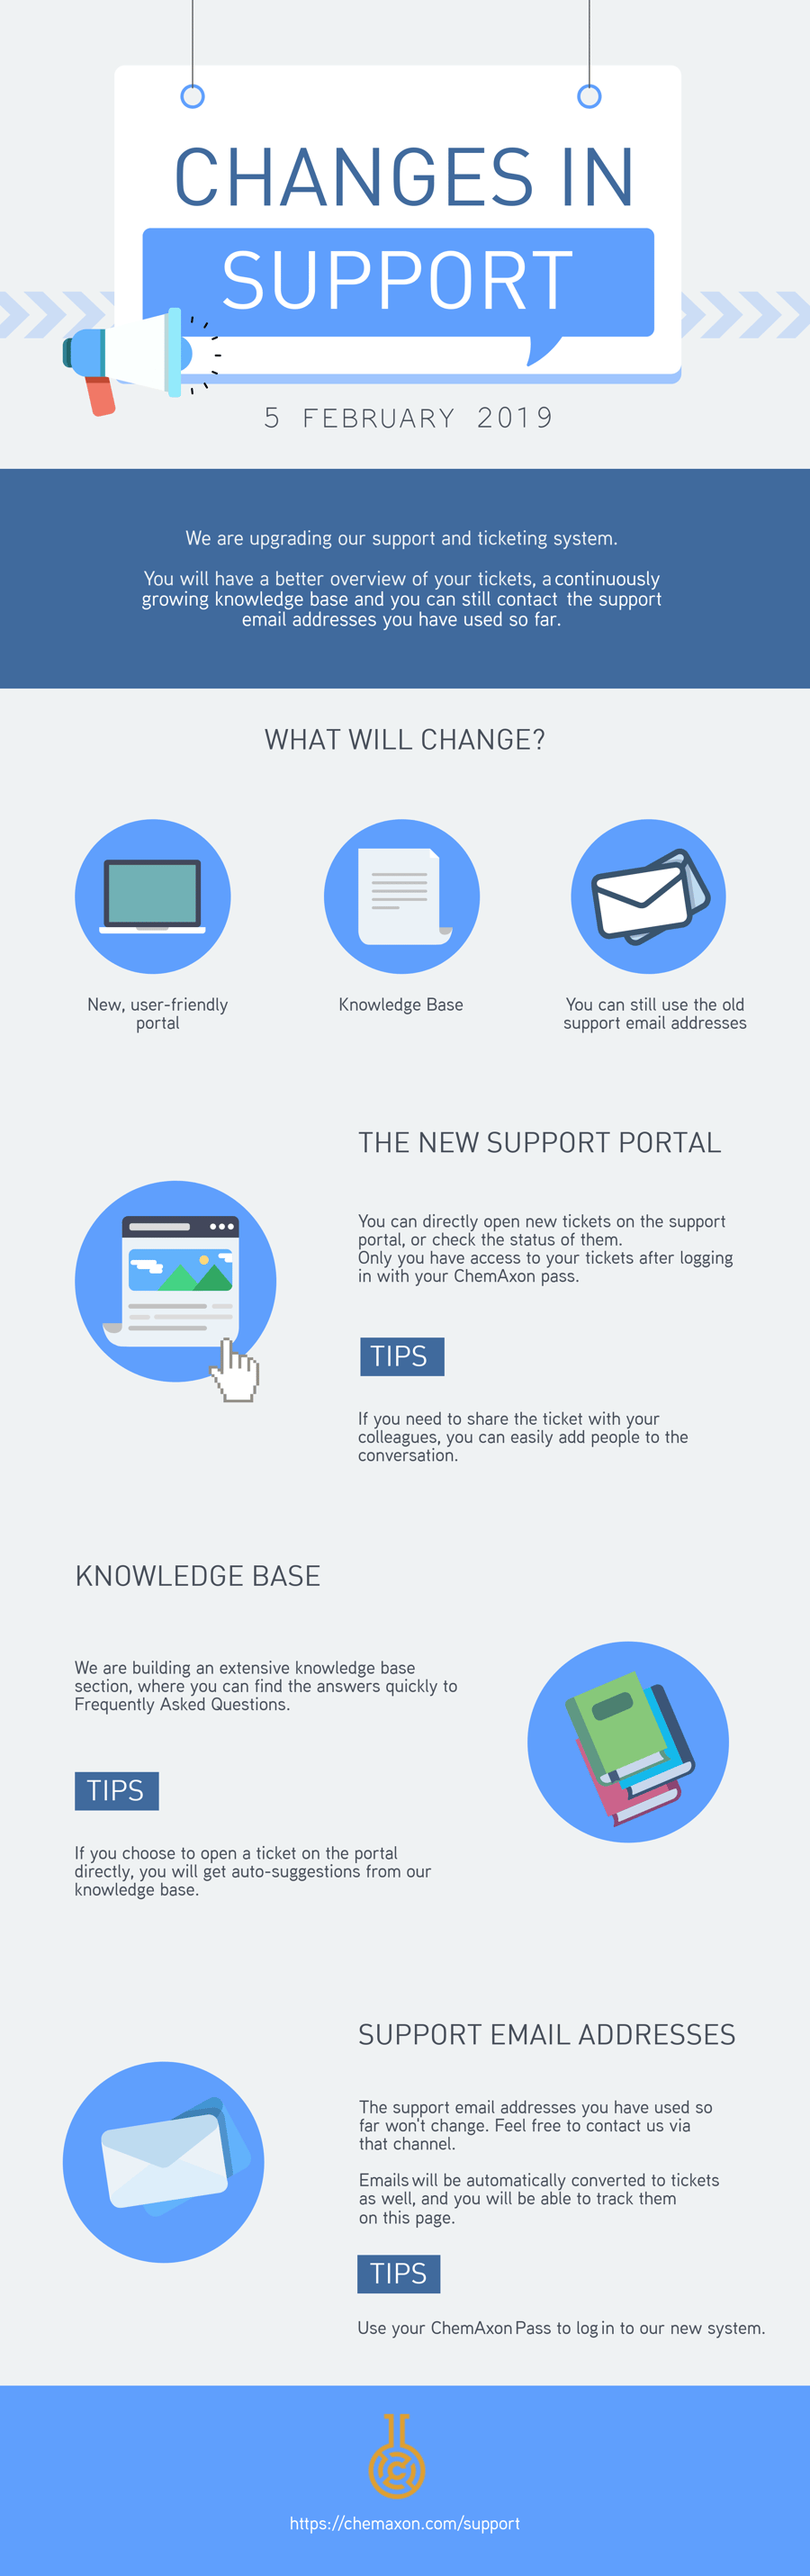 Infographic with illustration and text describing changes in support